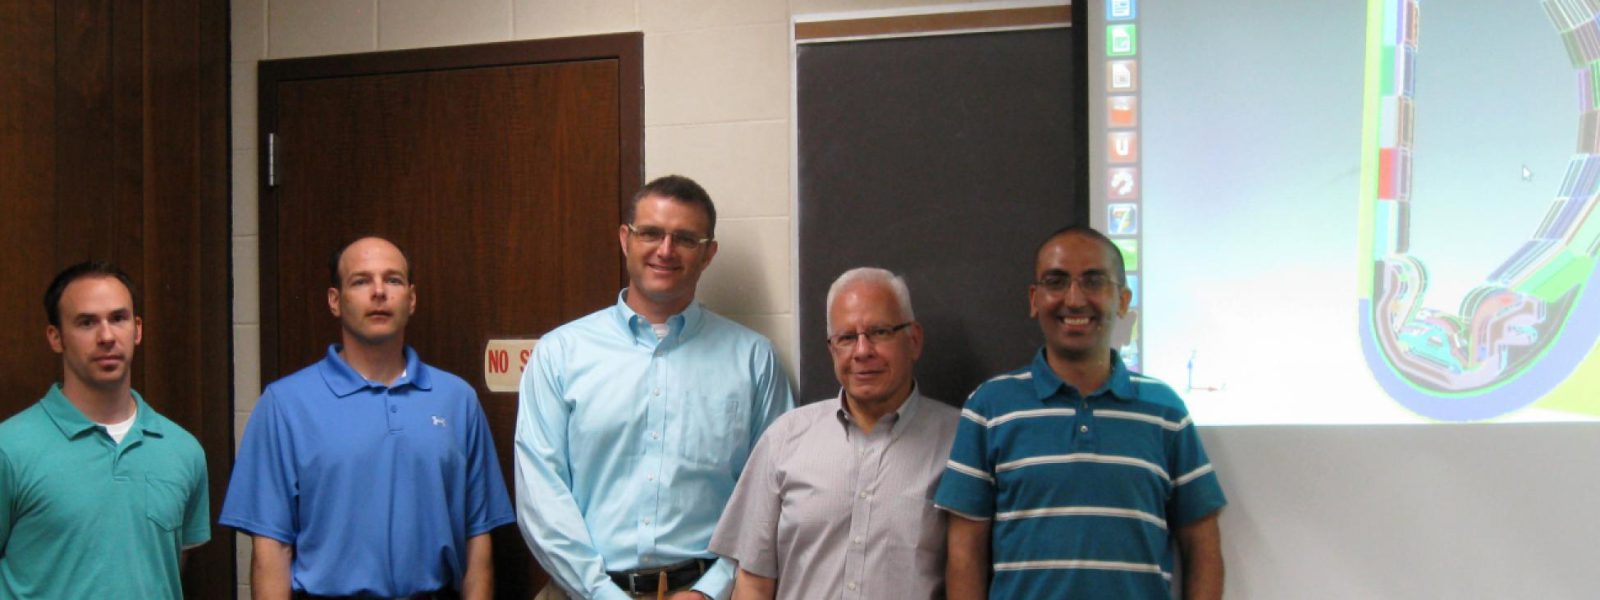 A neutronics model of ITER is behind (left to right) Ed Marriott, Tim Bohm, Paul Wilson, Mohamed Sawan and Ahmad Ibrahim, US ITER researchers at the University of Wisconsin.